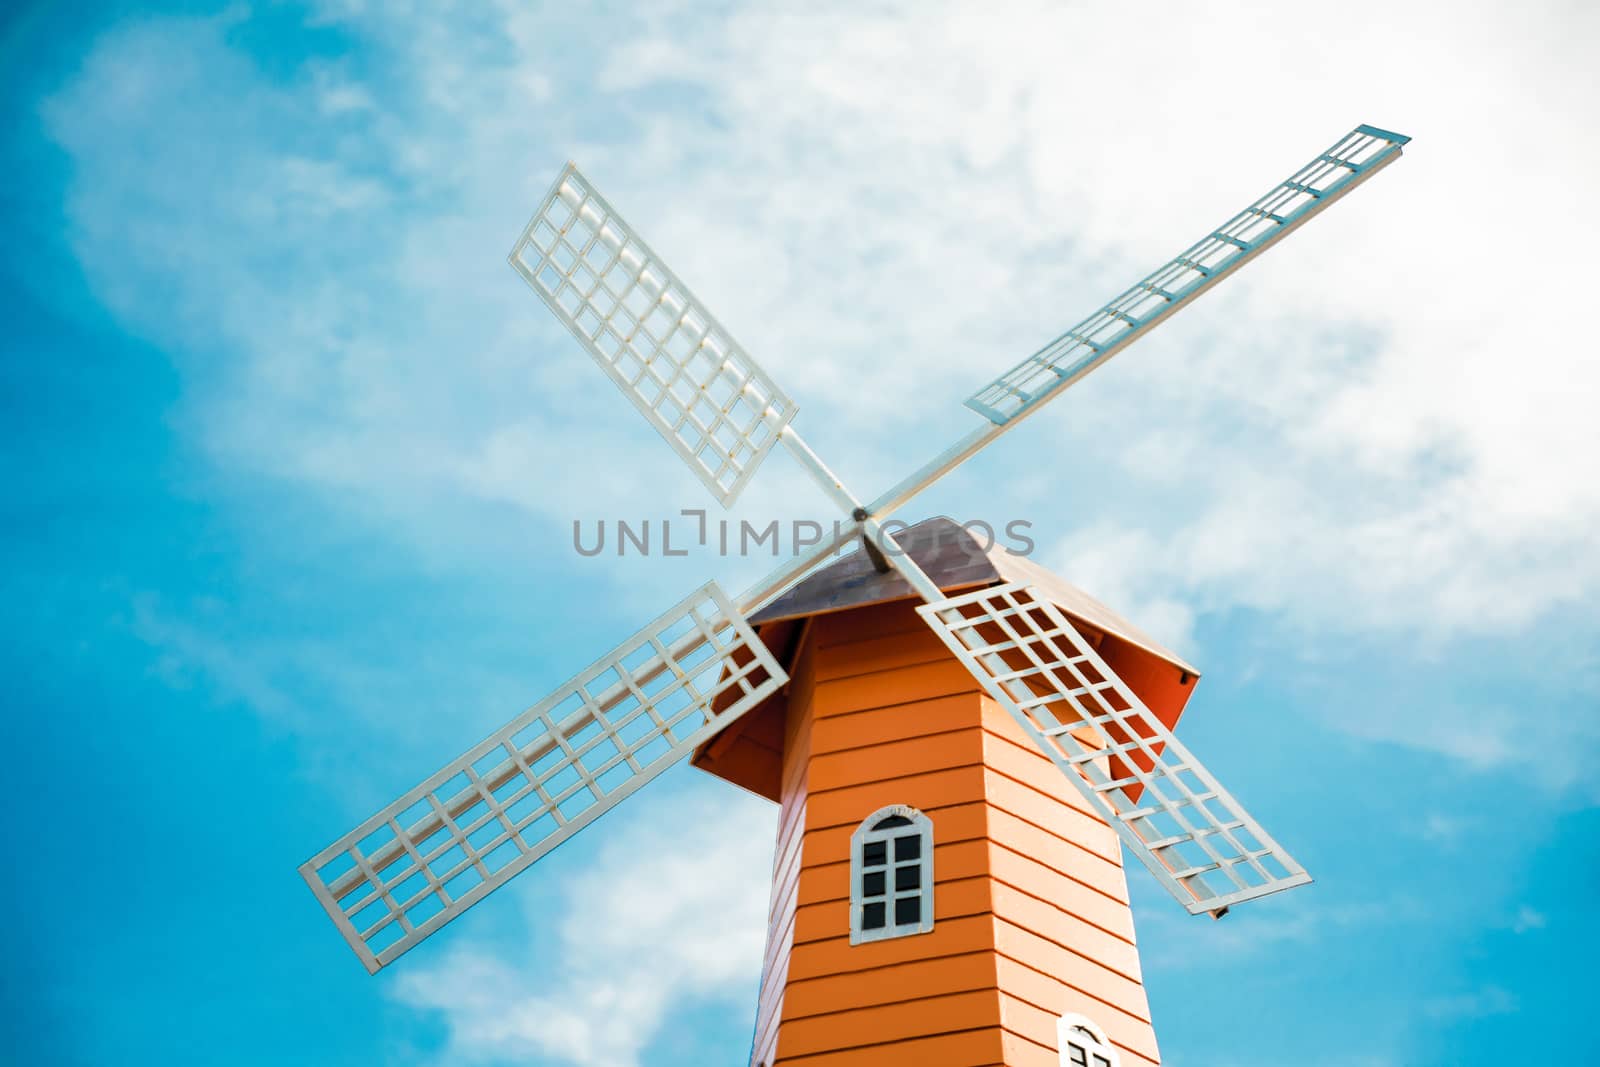 windmills over rows on the sky background